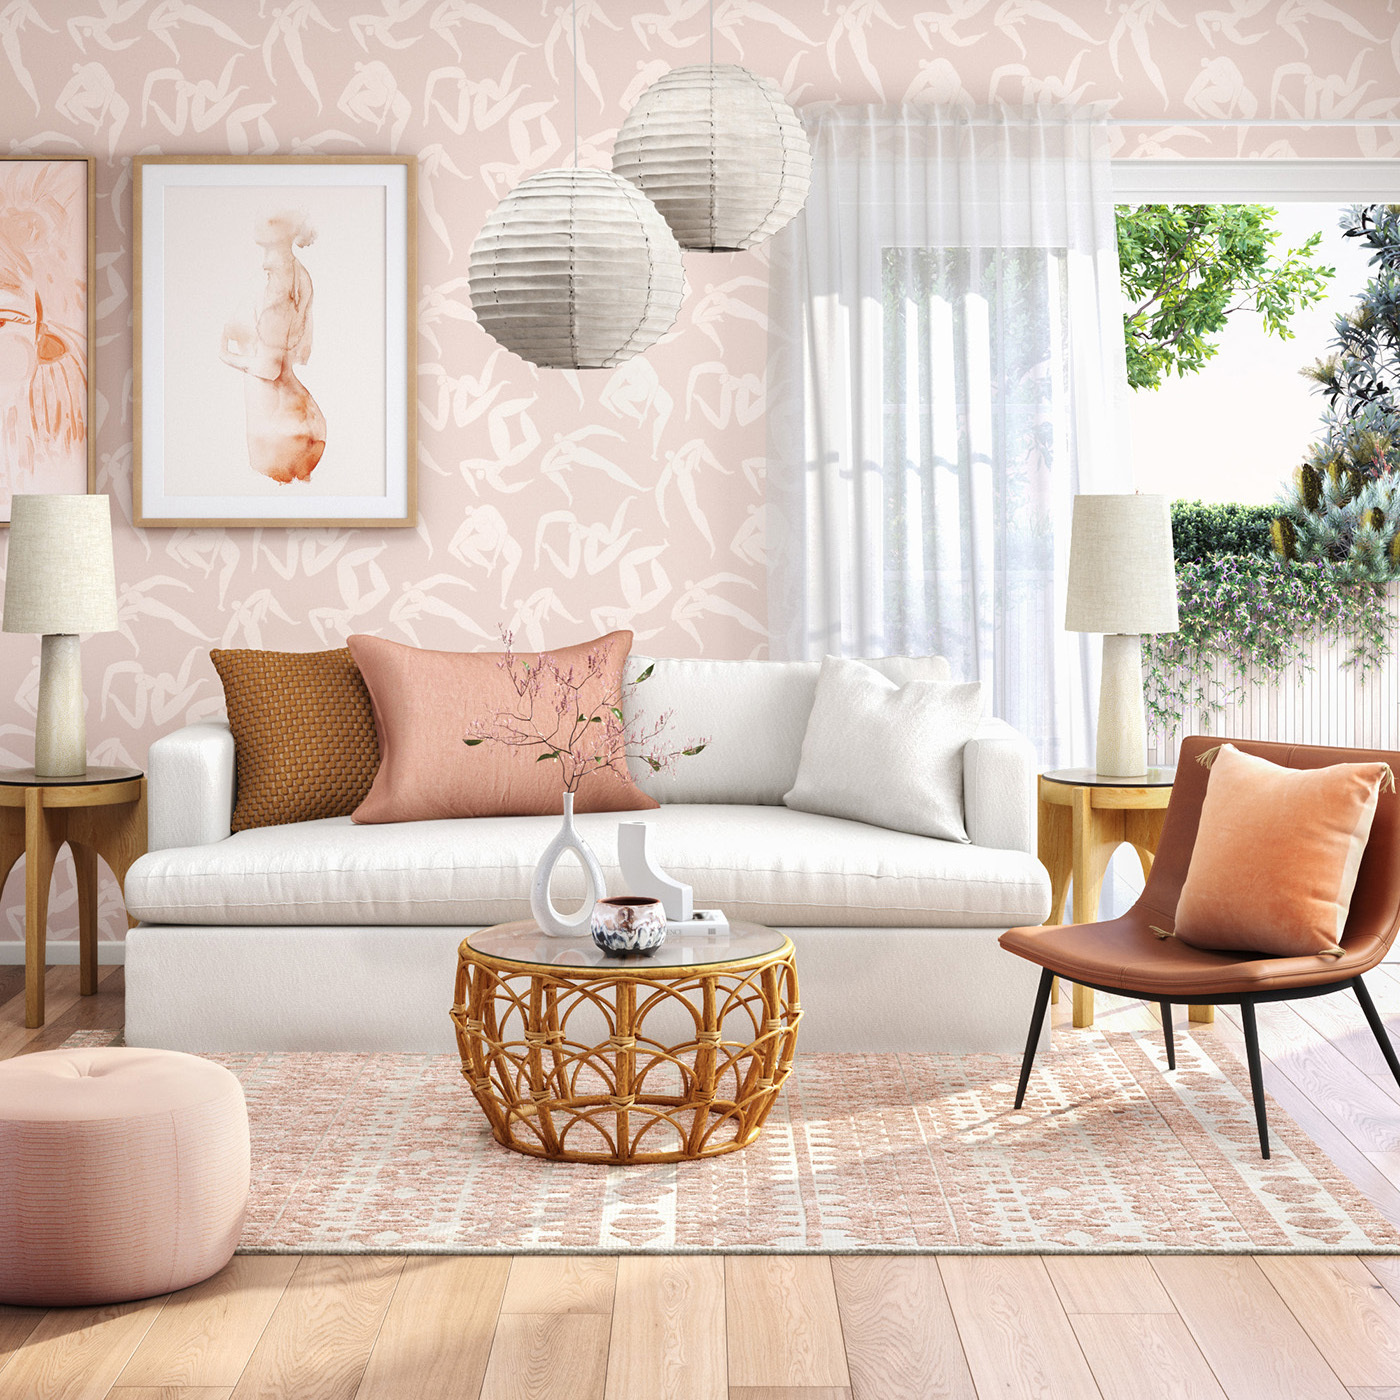 Blush Tone Living photo by Temple &amp; Webster